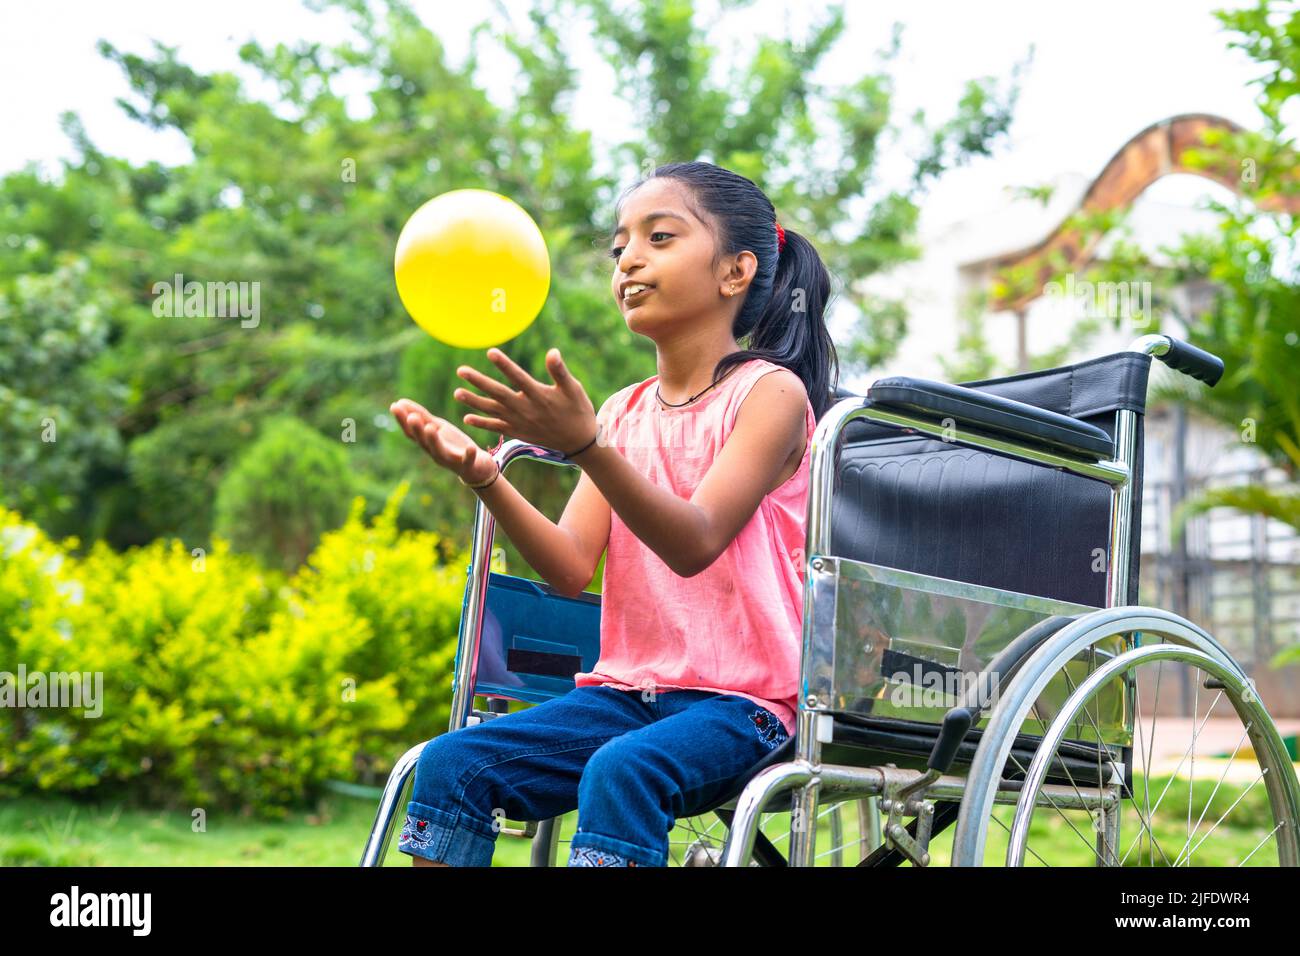 concept of happiness, freedom and enjoyment showing by Smiling alone girl kid with disability playing with ball while on wheelchair at park. Stock Photo